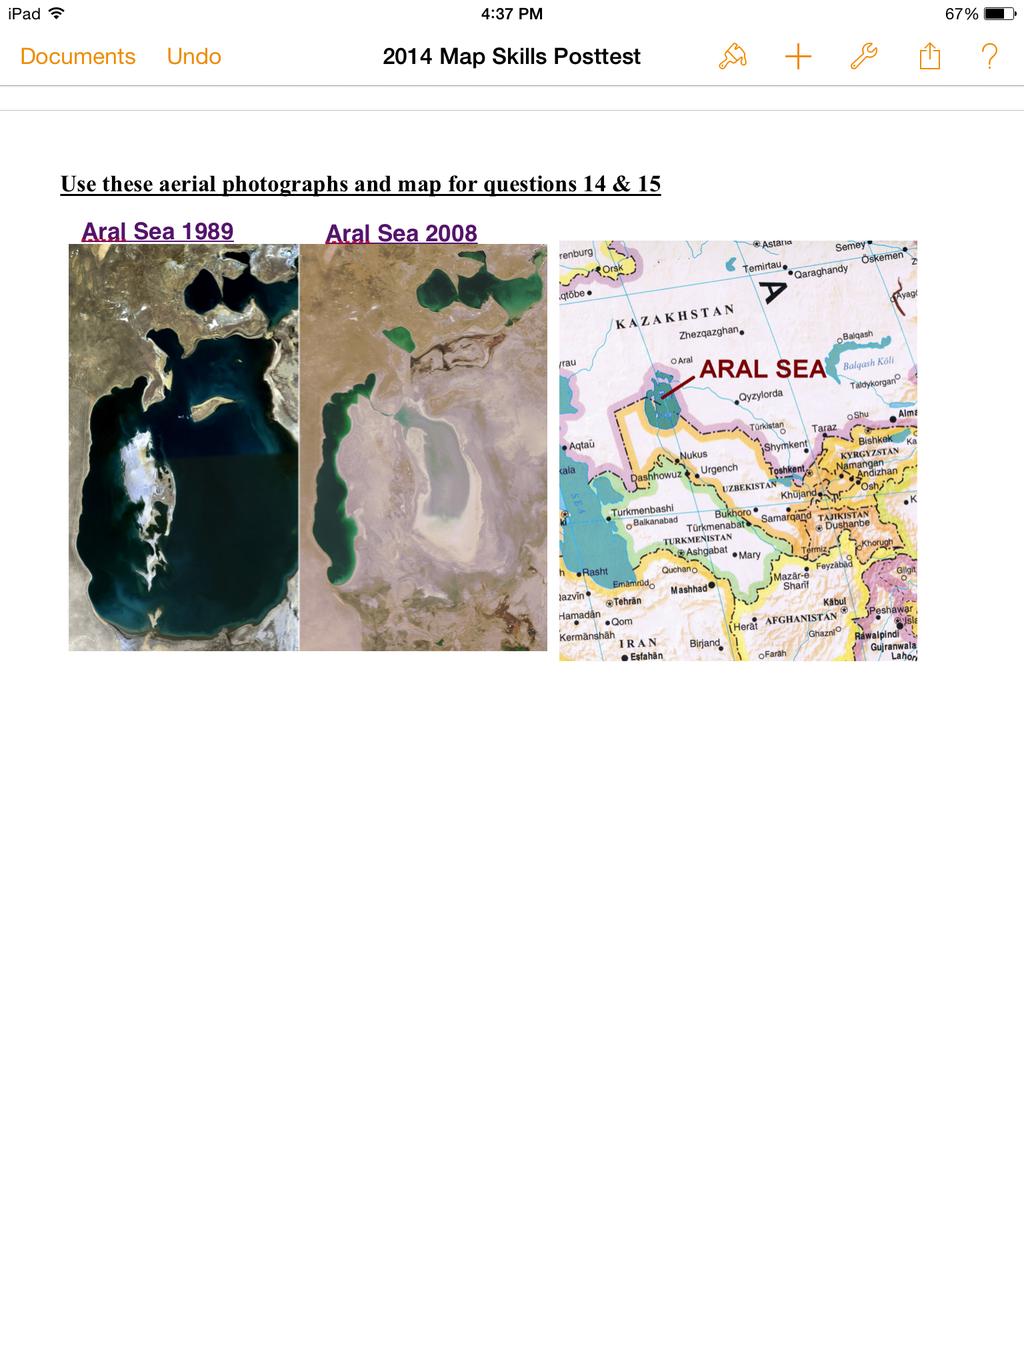 Use these aerial photographs and map for questions 14 & 15 14. Look at the aerial photographs and map of the Aral Sea. What advantage does the map have over the photographs? a. The map shows the countries and cities surrounding the Aral Sea.